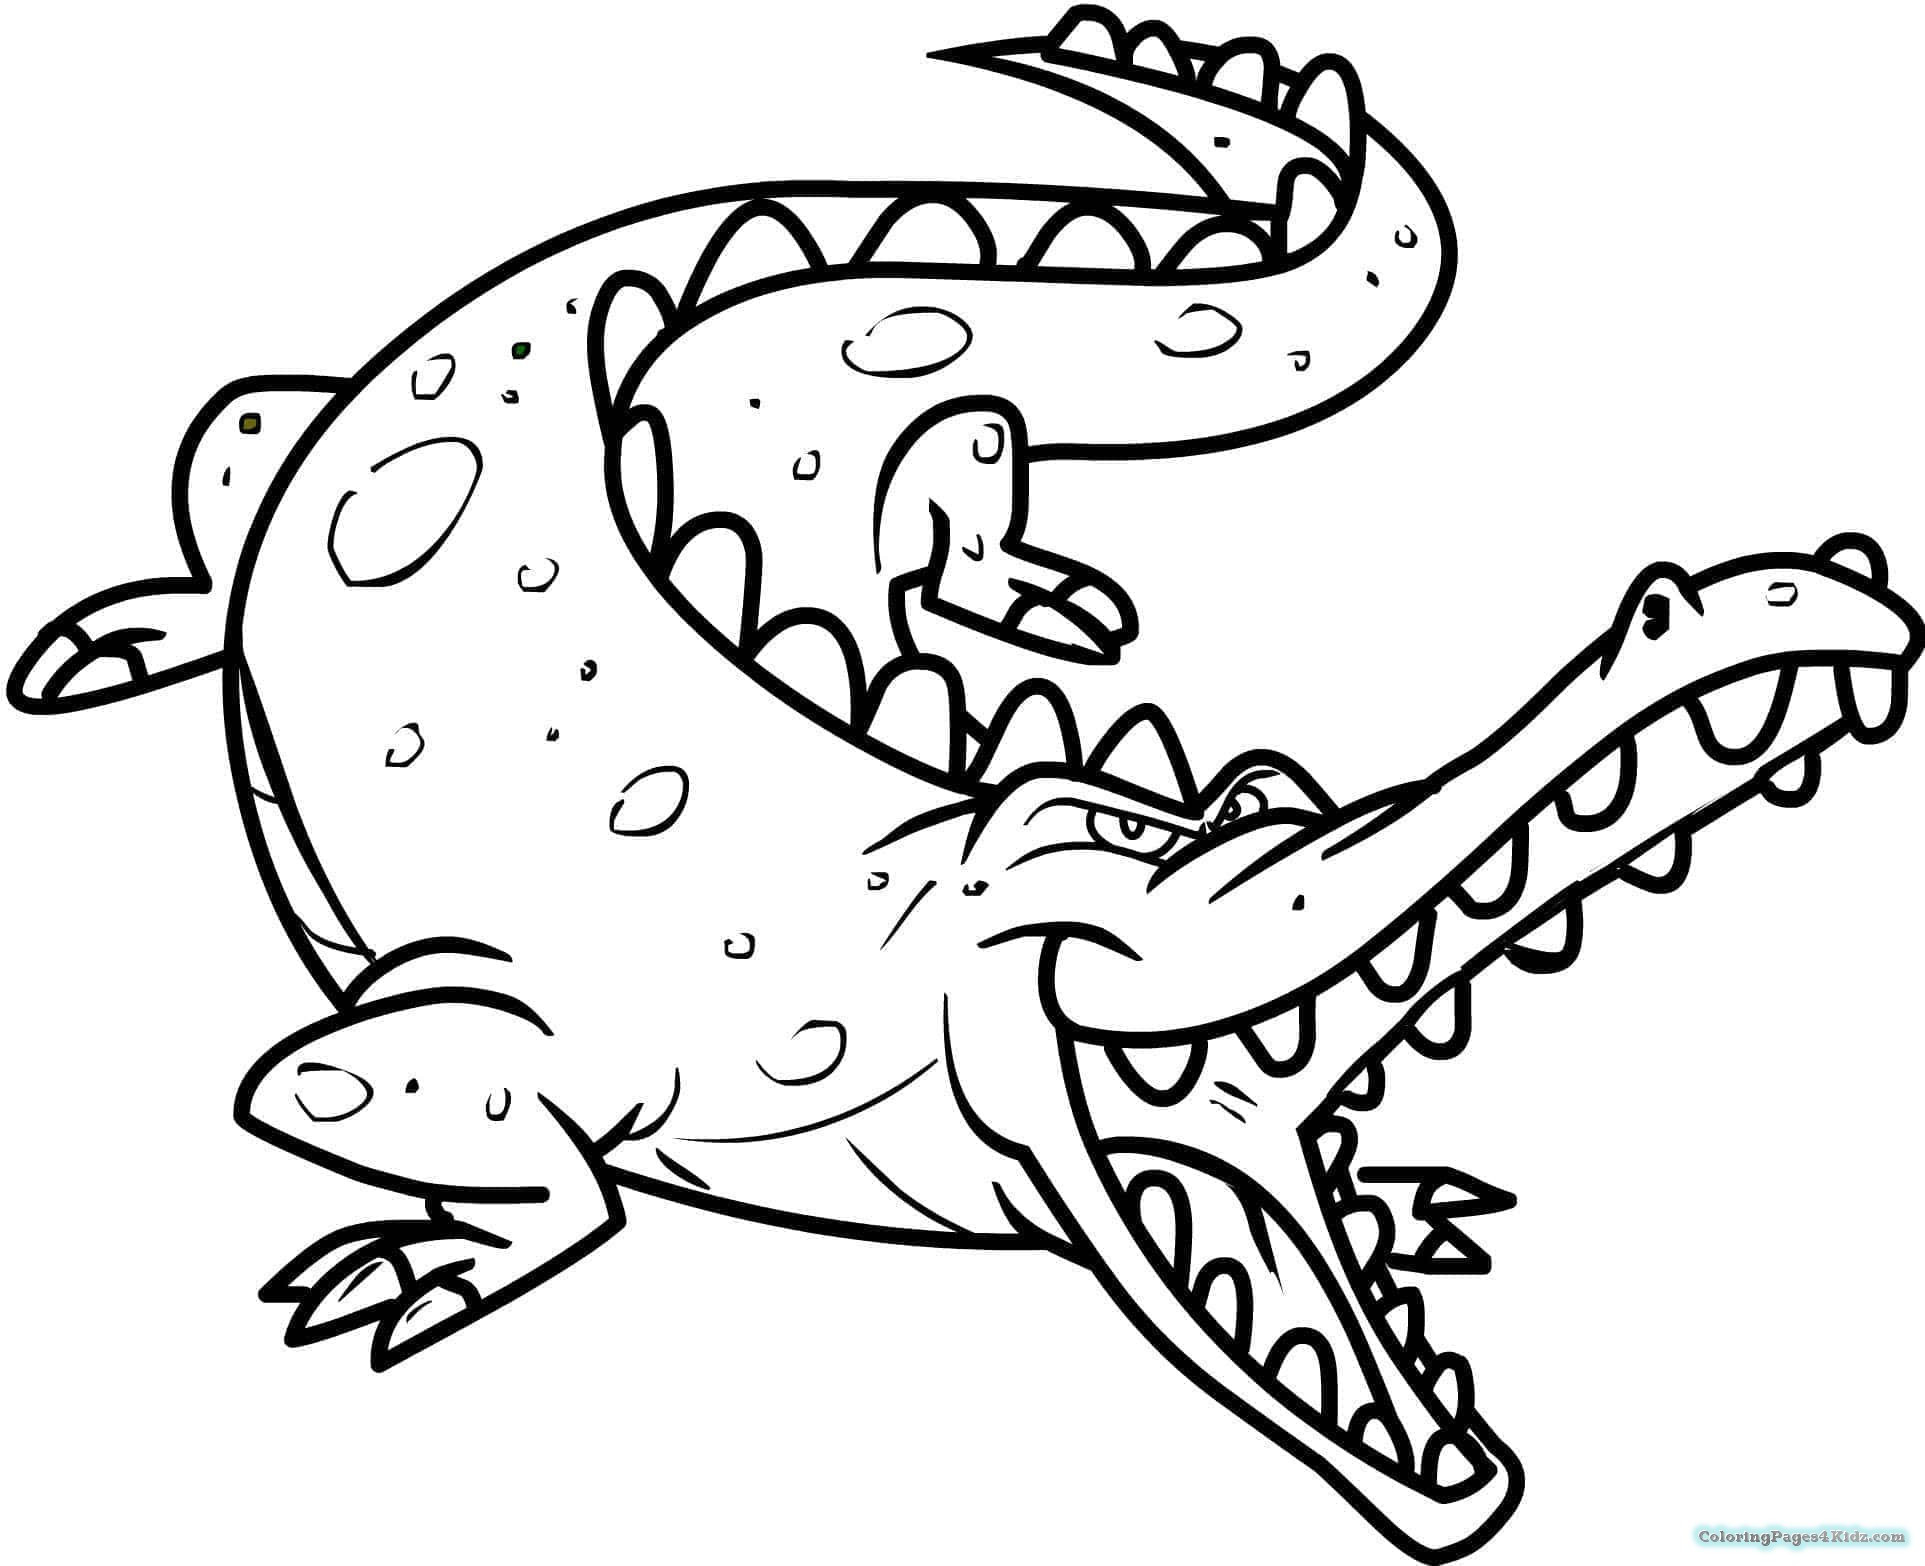 Best ideas about Therapeutic Coloring Pages For Kids
. Save or Pin Alligator Therapy Coloring Pages Now.